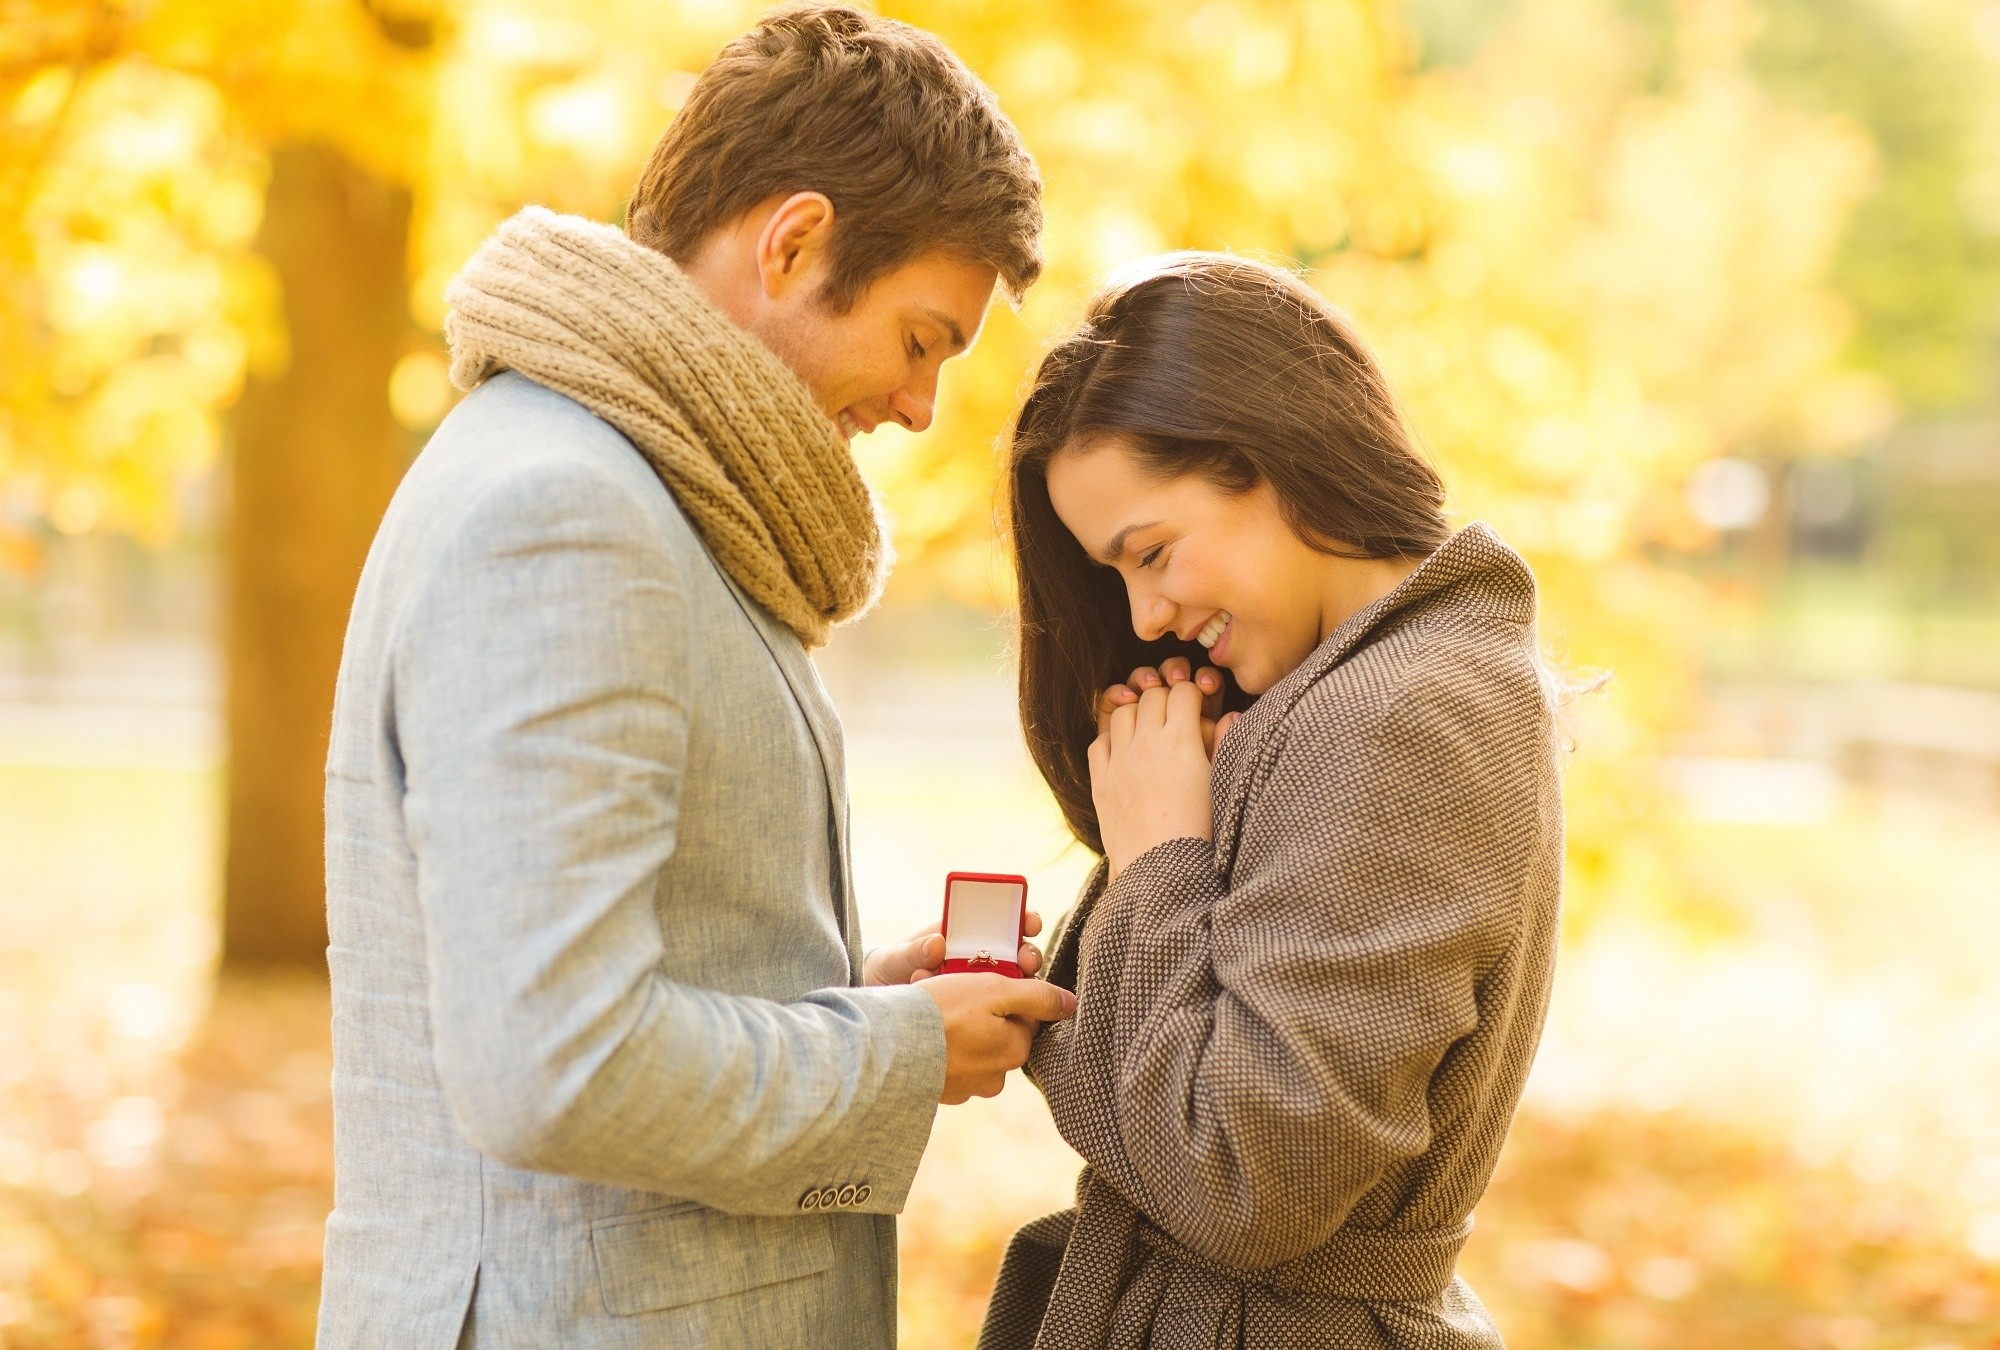 engagement ring, love proposal, holidays, love, couple, relationship and dating concept - romantic man proposing to a woman in the autumn park